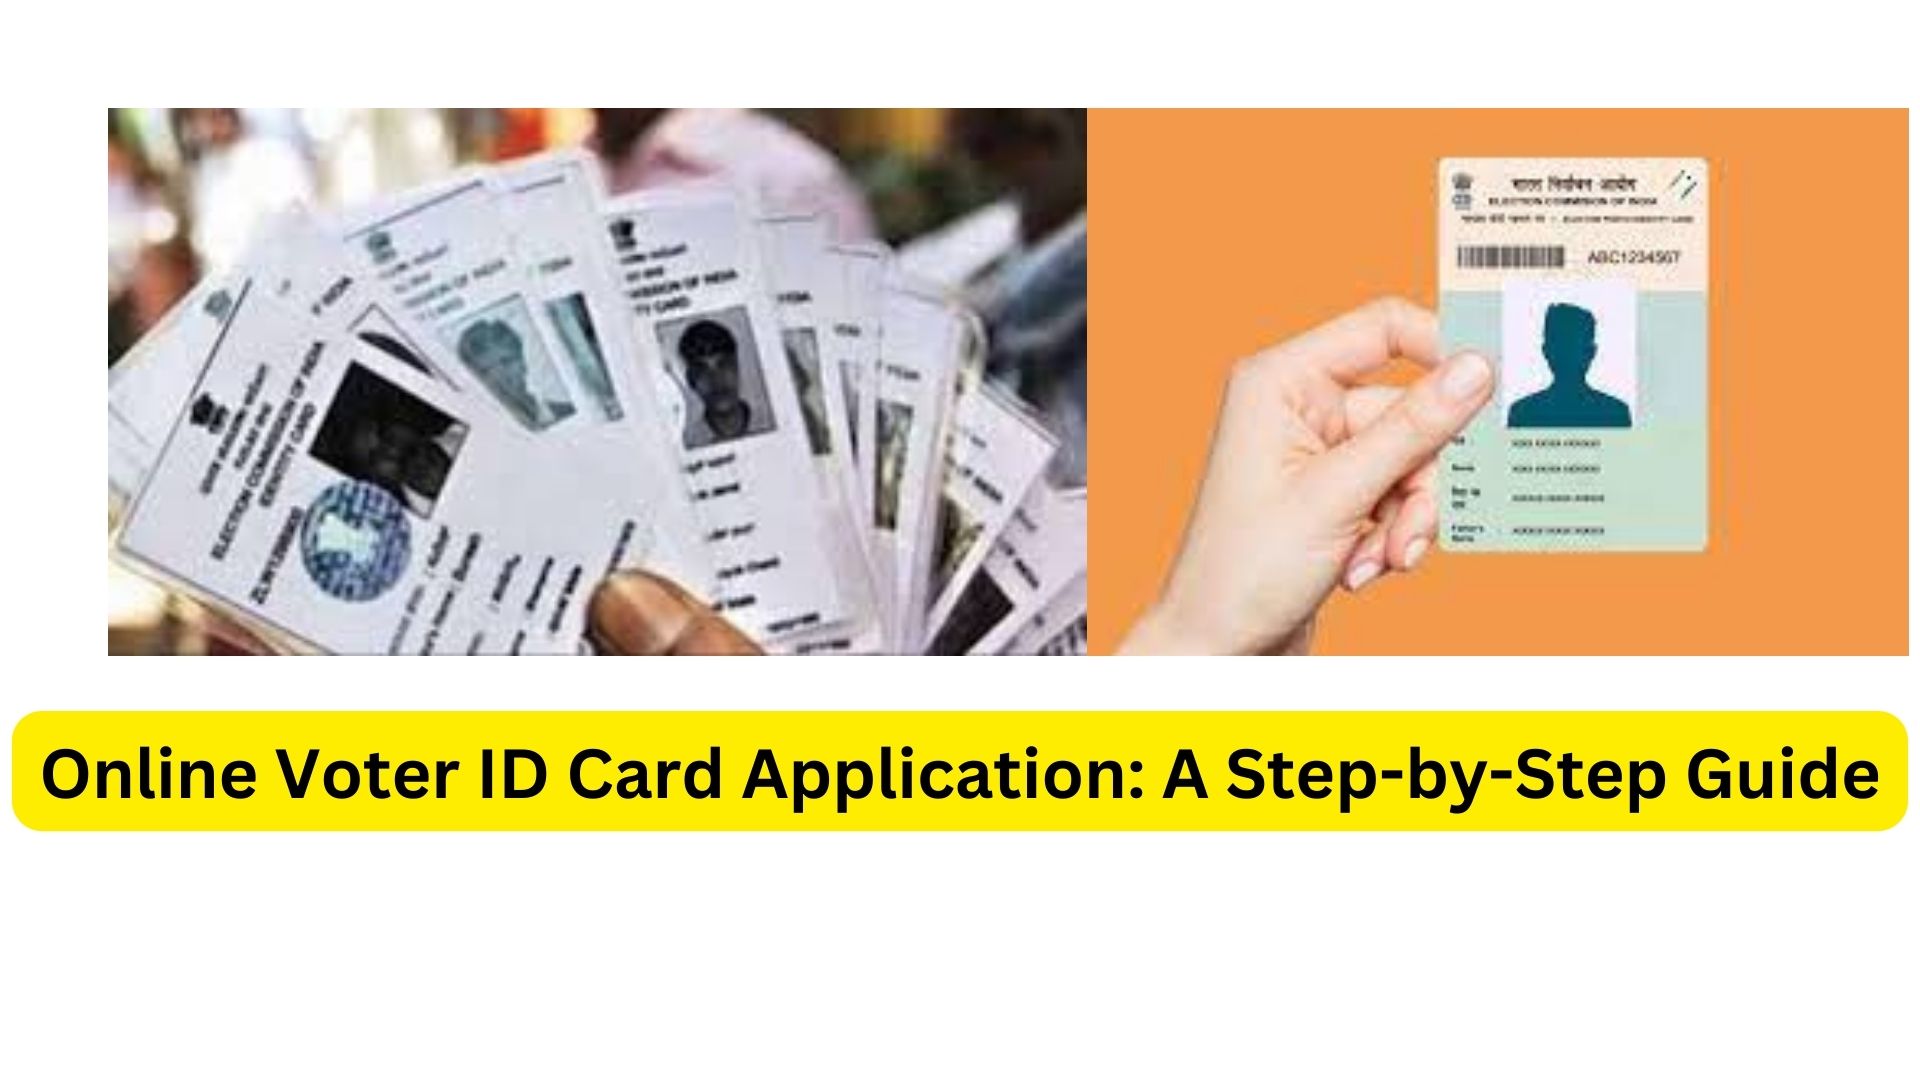 Online Voter ID Card Application: A Step-by-Step Guide